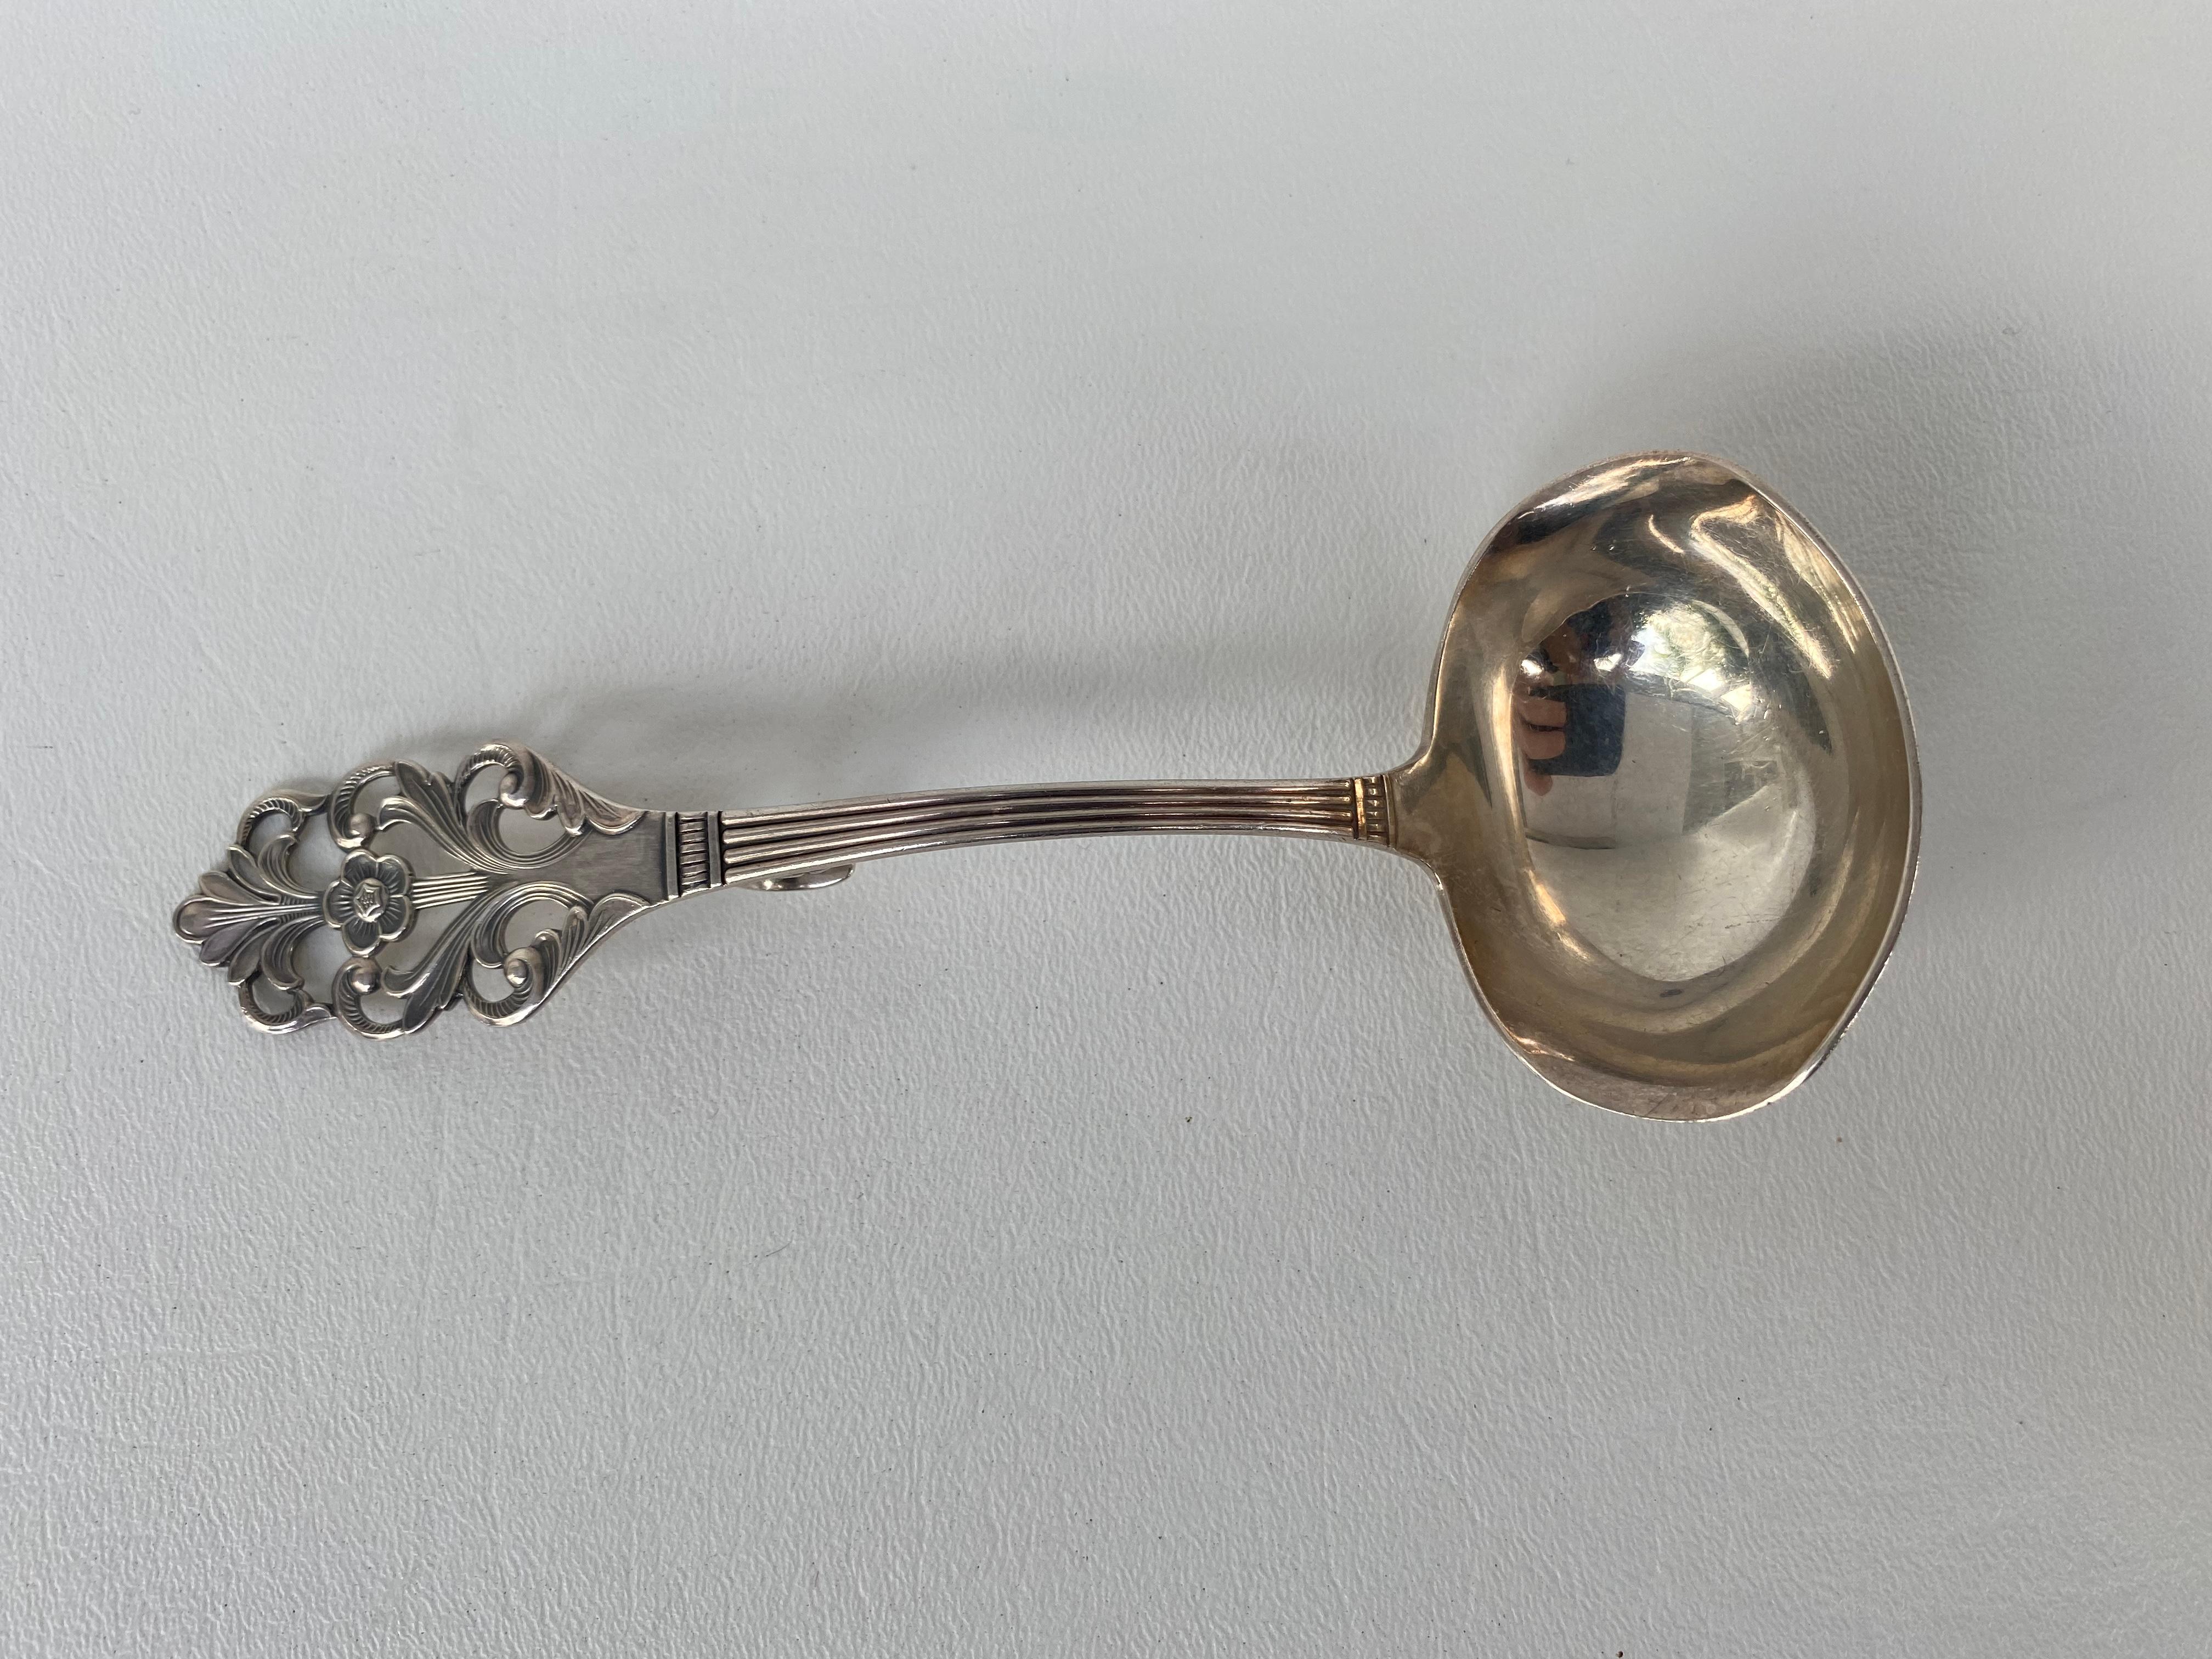 Thorvald Marthinsen viking rose sterling silver Gravy Ladle, Norway

Offered for sale is a Thorvald Marthinsen of Norway sterling silver gravy ladle in the Viking Rose pattern. This difficult-to-find serving ladle is fully marked 